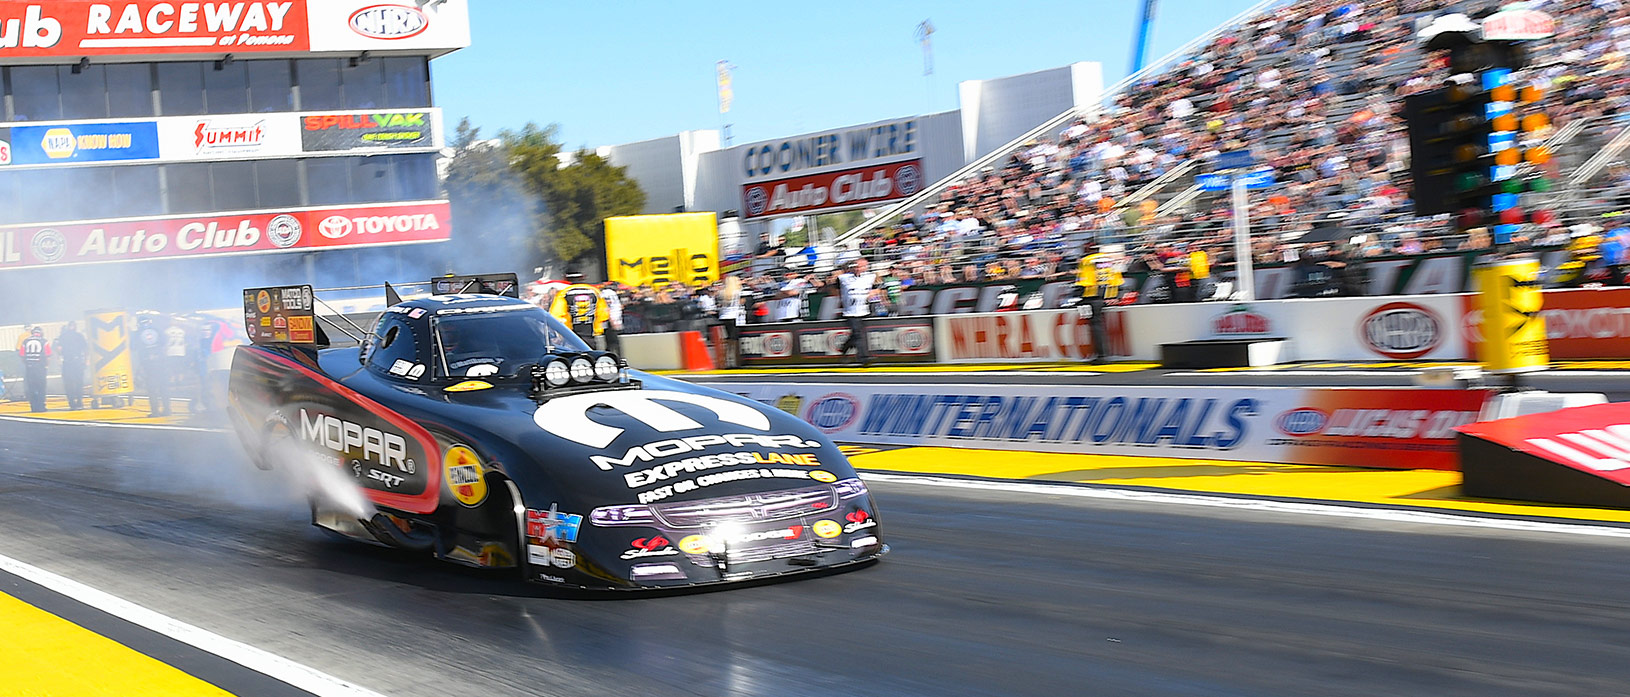 Light ‘Em Up – We’re Ready to Burn Rubber at the NHRA Winternationals